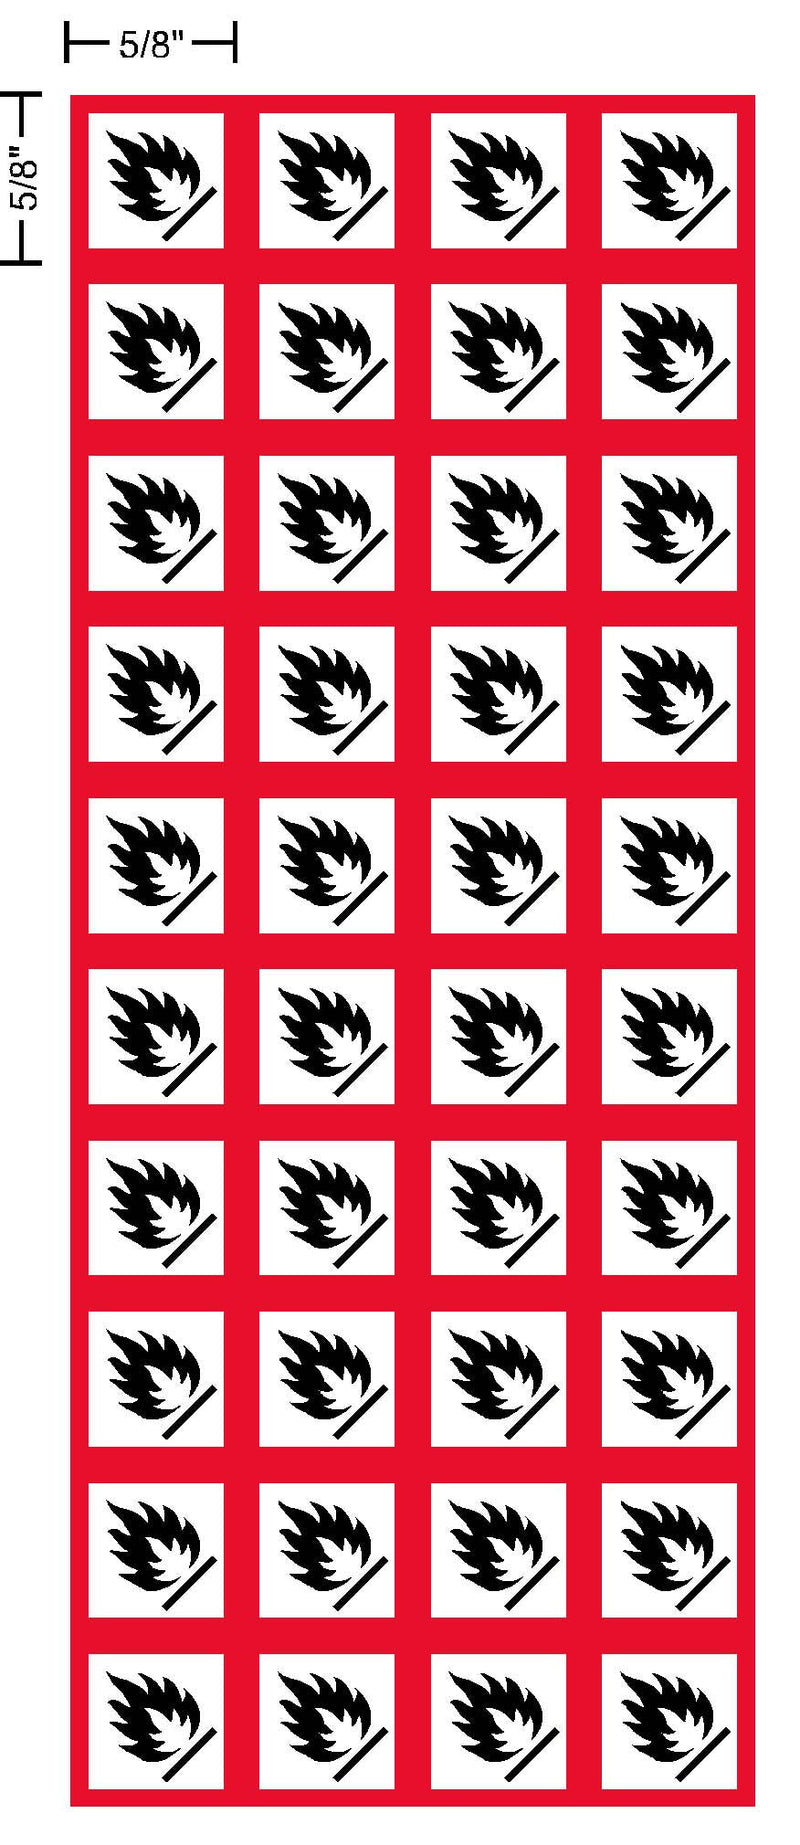 [Australia - AusPower] - GHS Flammable, Flame, Fire, Burning, Hazard, Pictogram, 5/8 inch, .625 inch Sides, Decal, Label, kit OSHA Compliant, Vinyl Sticker, Sheet, 40 of The Decals per Sheet 